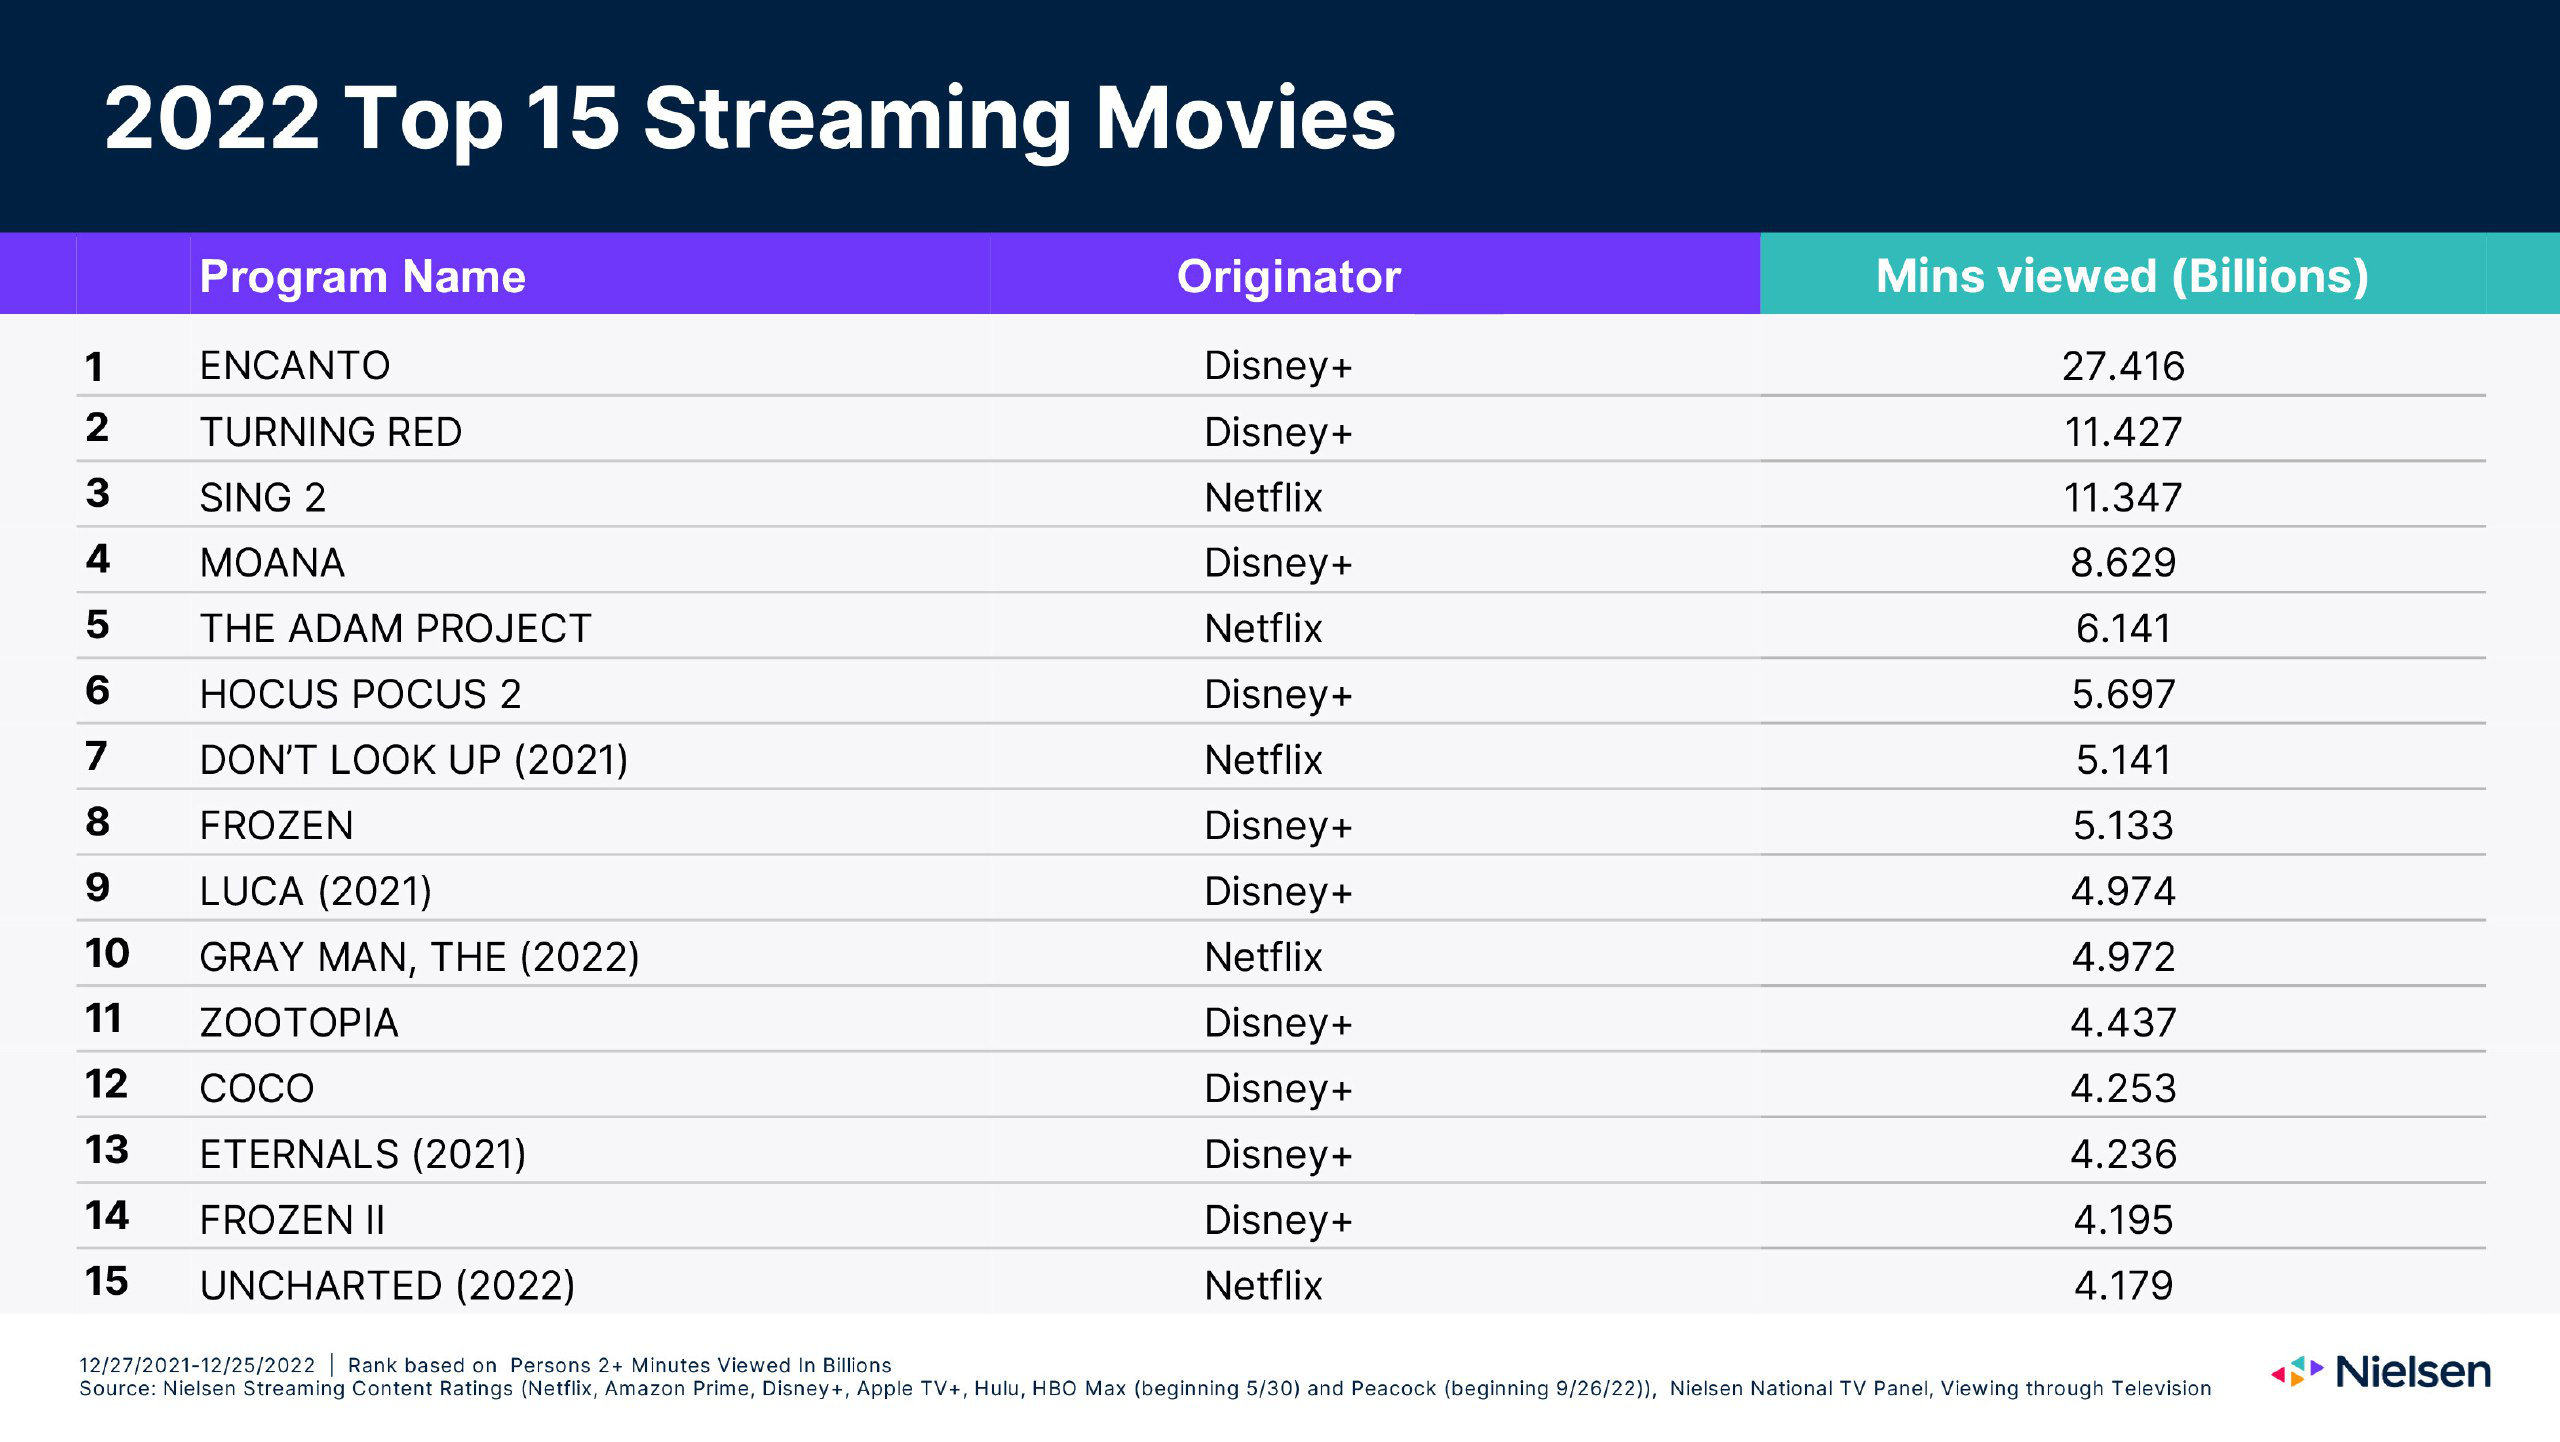 Stranger Things became the most watched TV series in 2022 in the US